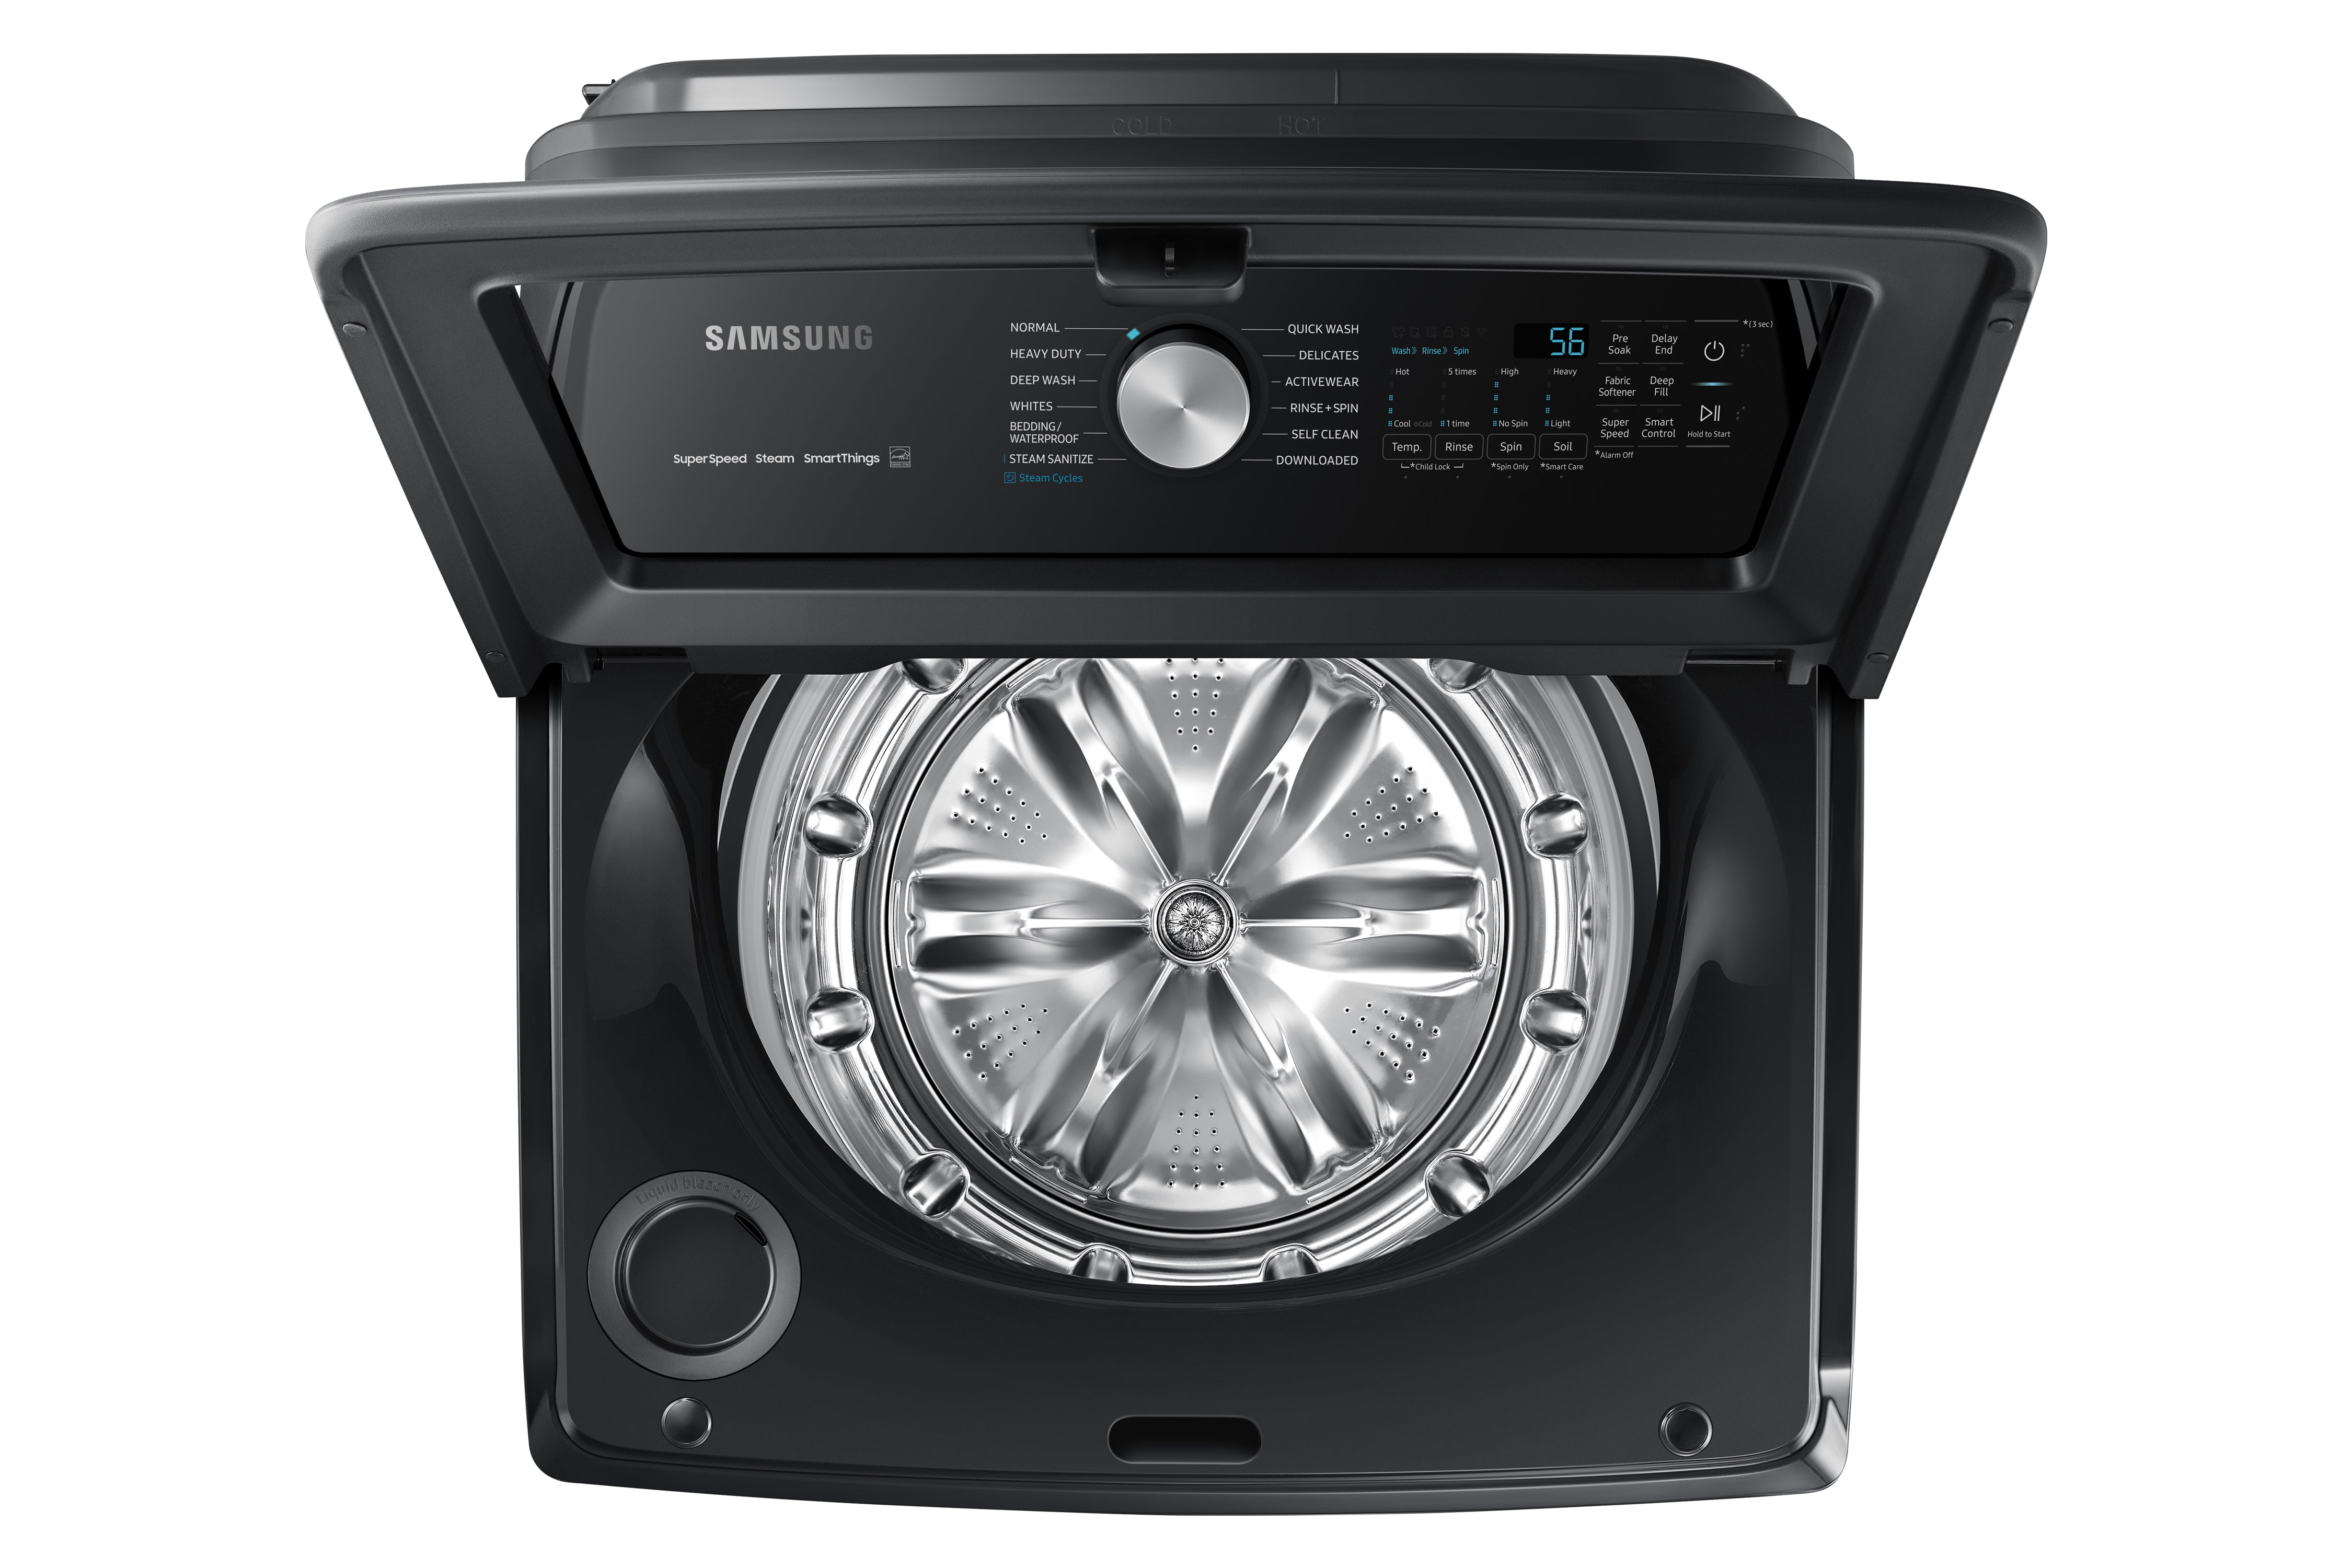 Samsung - 6 cu. Ft  Top Load Washer in Black Stainless - WA52B7650AV